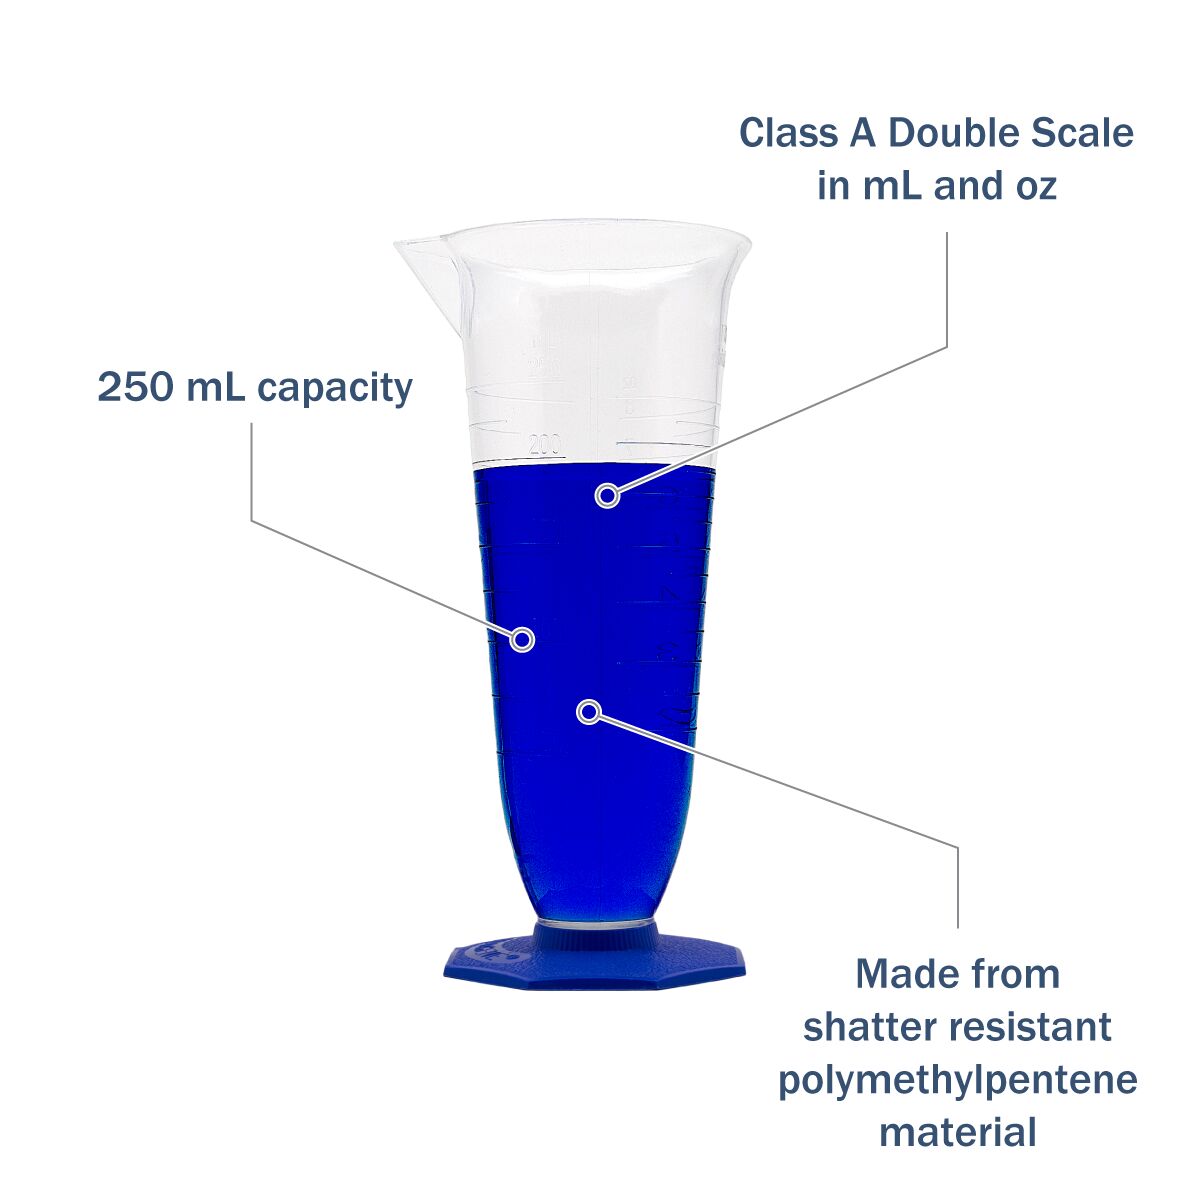 Double-Scale Polymethylpentene Pharmaceutical Graduate 250 mL features